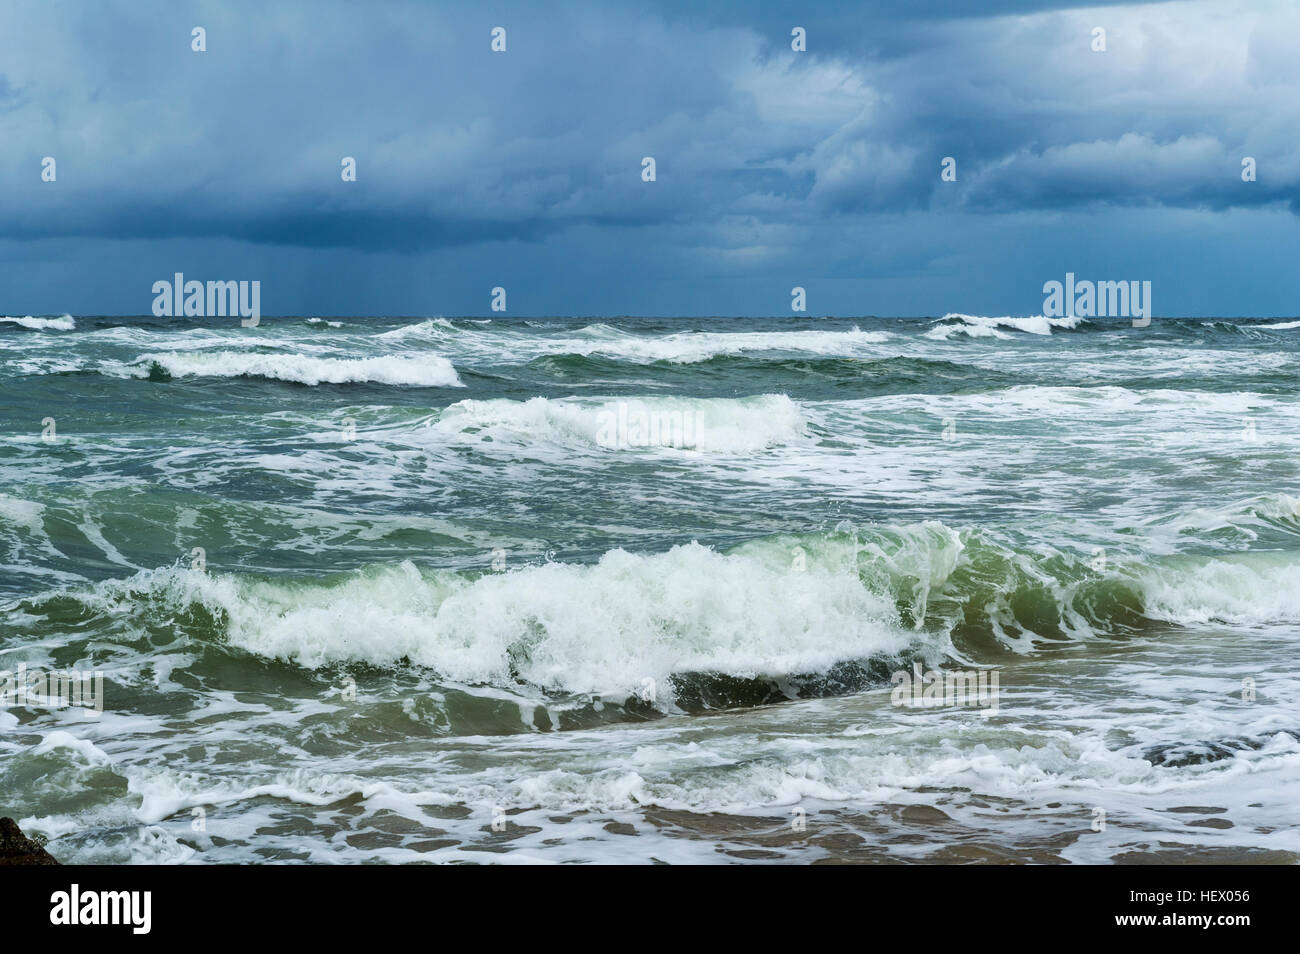 Storm surge waves rolling onto an empty beach. Stock Photo